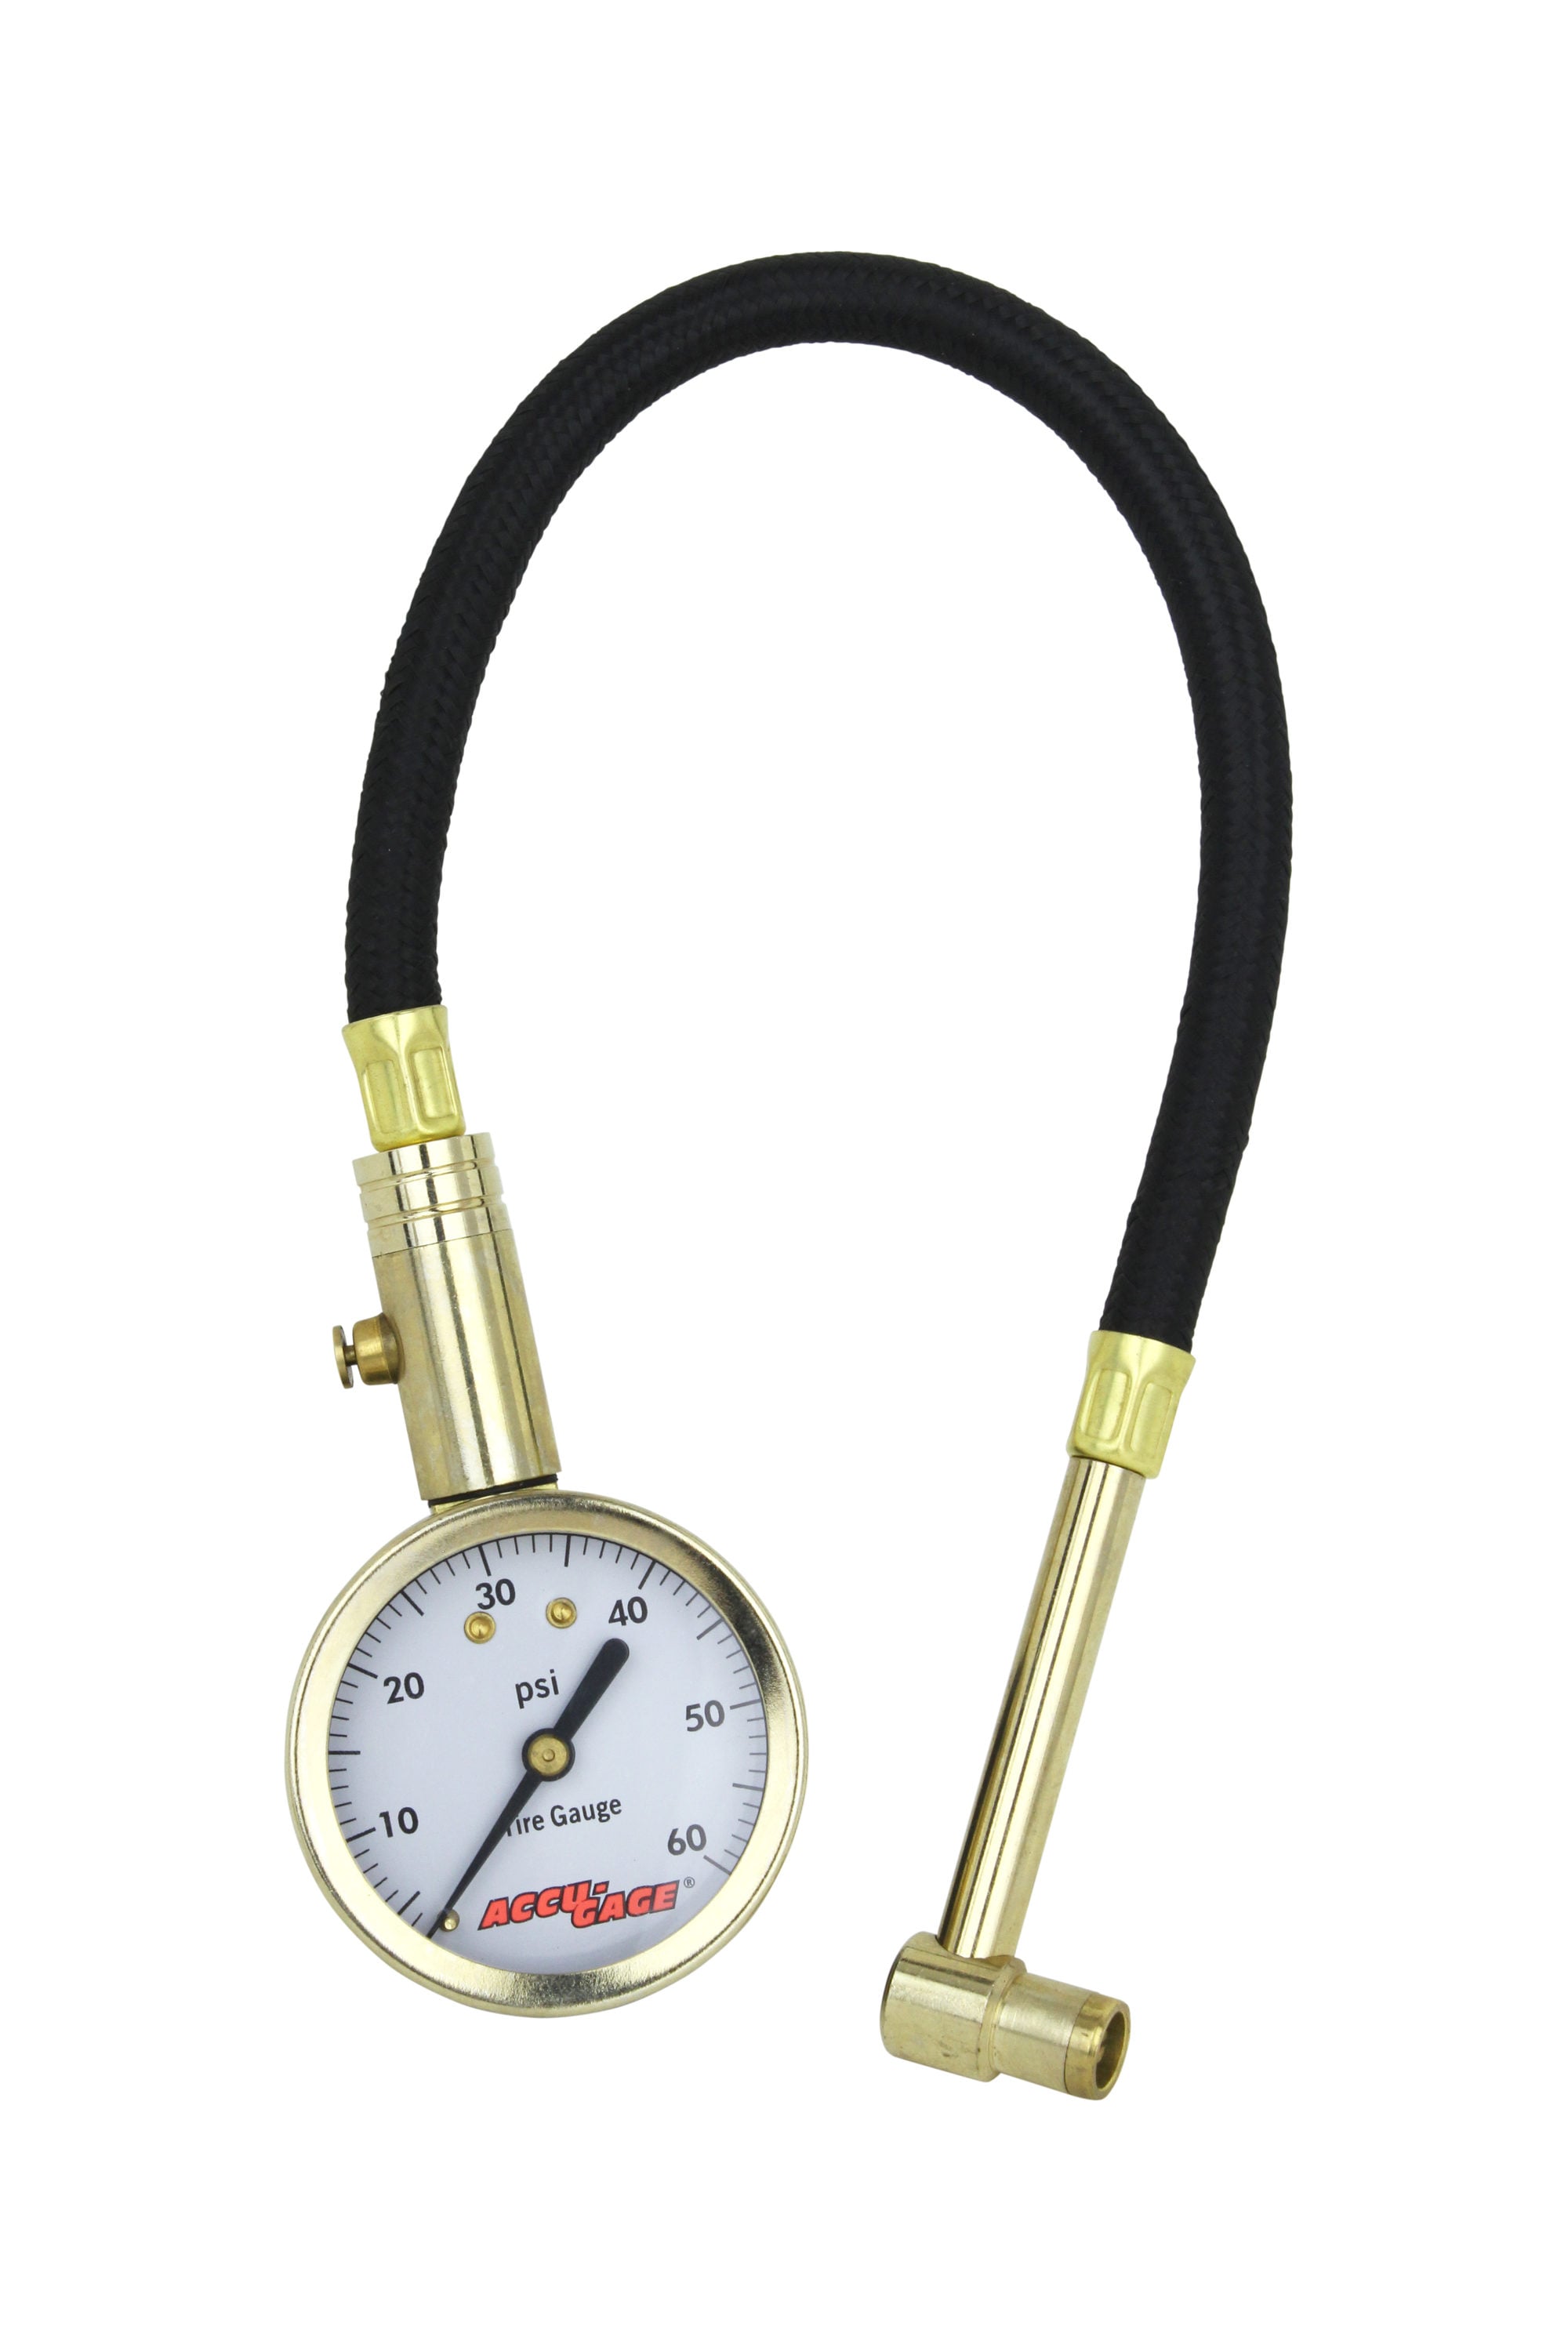 ANSI Certified for Motorcycle/Car/Truck Tires AccuGage by Milton Dial Tire Pressure Gauge with Straight Air Chuck and 11 in Braided Hose 0-100 PSI 